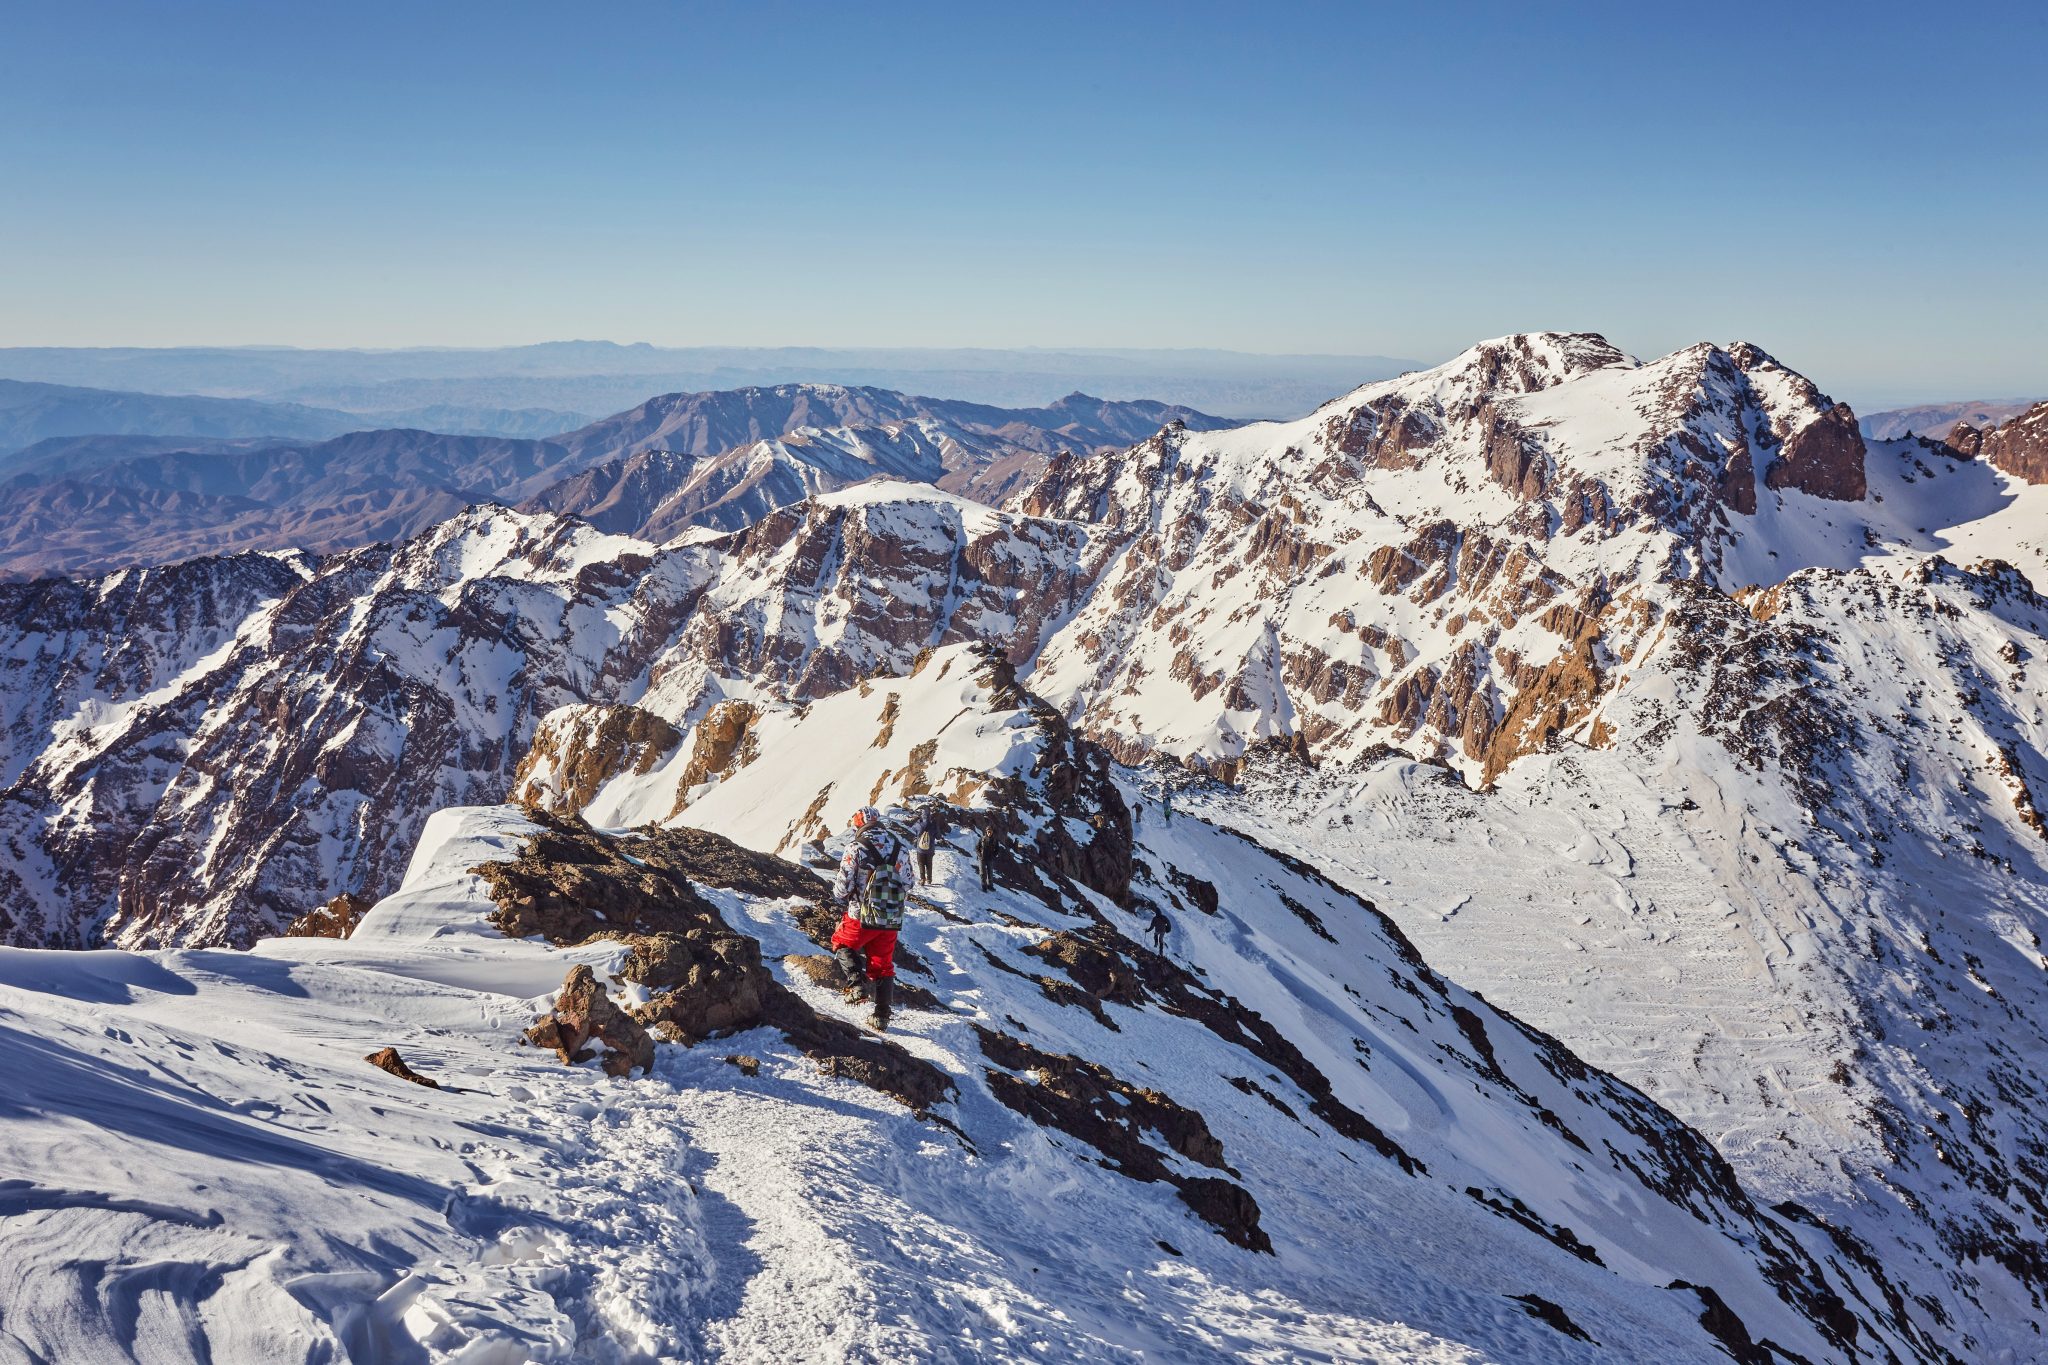 Toubkal,National,Park,,The,Peak,Whit,4,167m,Is,The,Highest